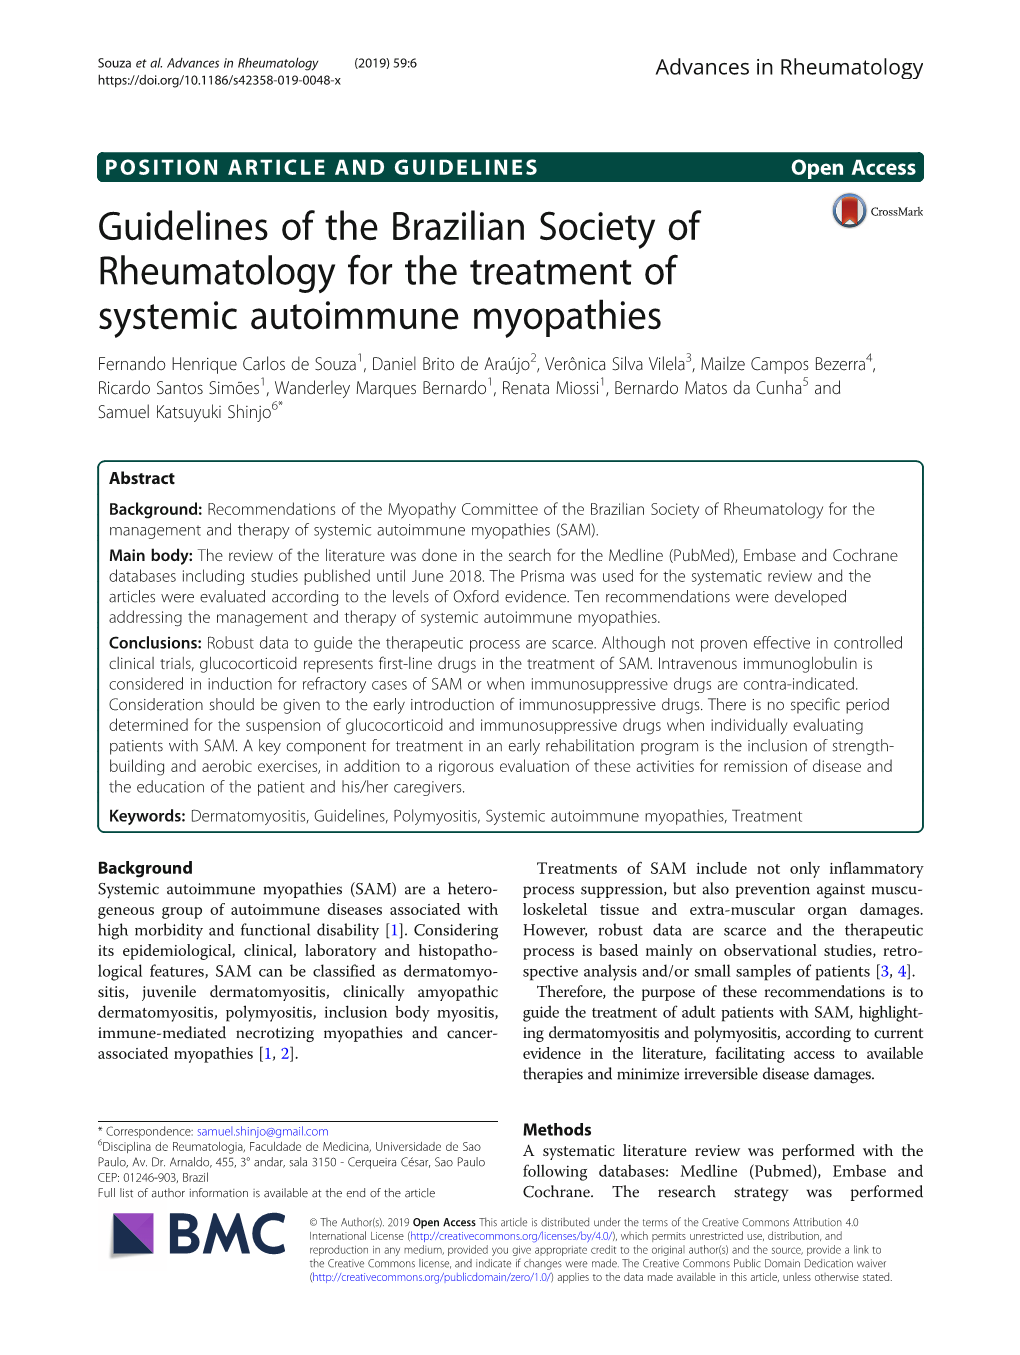 Guidelines of the Brazilian Society of Rheumatology for the Treatment Of